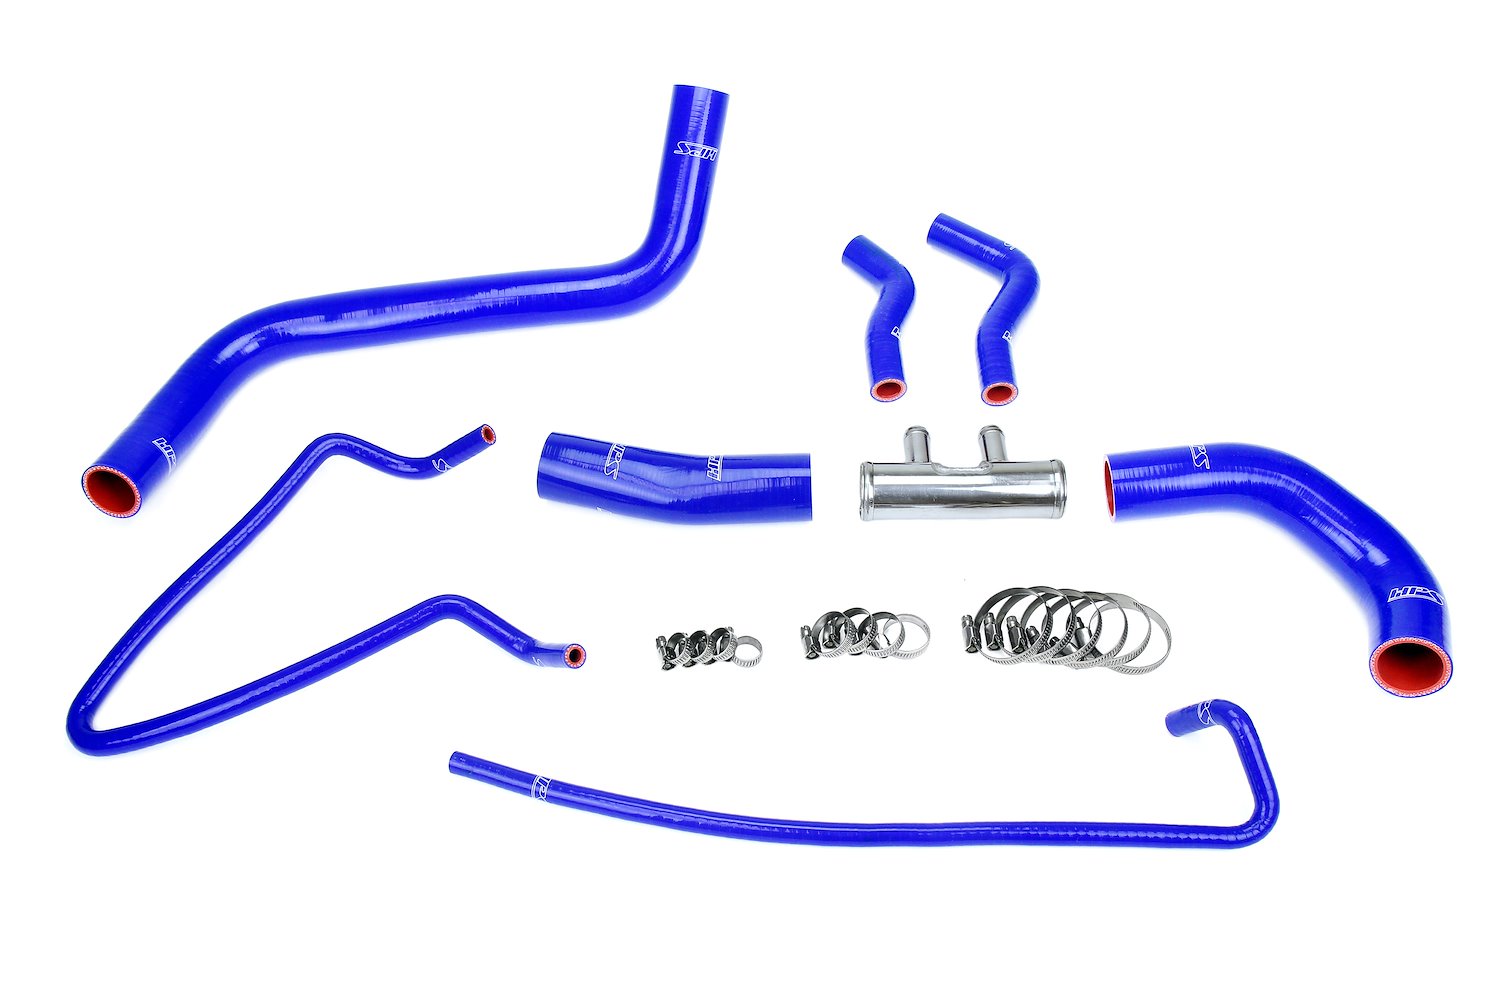 57-2064-BLUE Radiator Hose Kit, 3-Ply Reinforced Silicone, Replaces Rubber Radiator Coolant Hoses